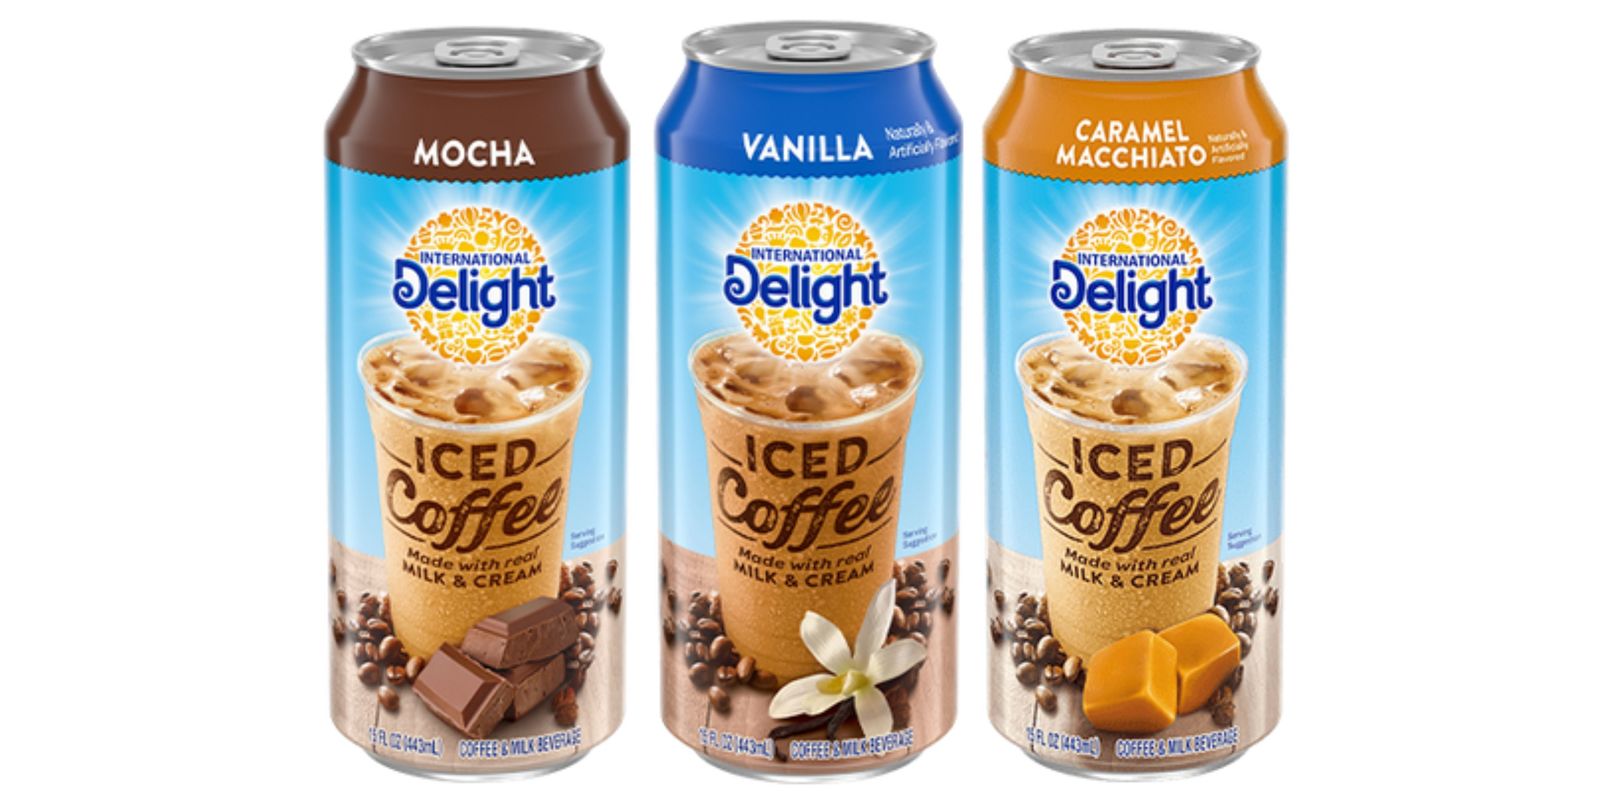 International Delight Iced Coffee 3 Flavor Variety Pack Canned Coffee 12 Pack - $59.99